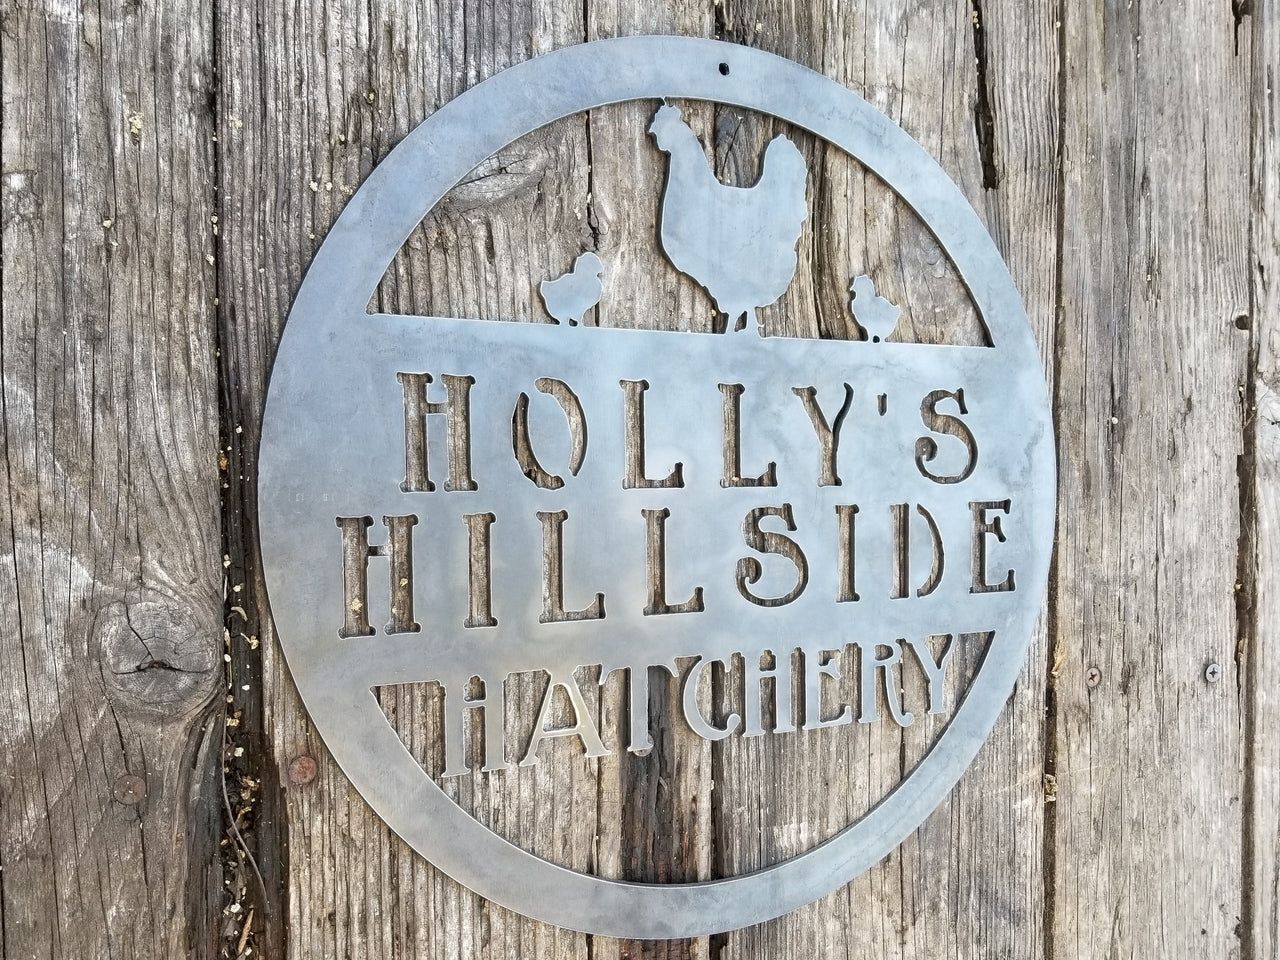 This metal sign is personalized and has the image of a chicken and two chicks at the top. The sign reads, "Holly's Hillside Hatchery".